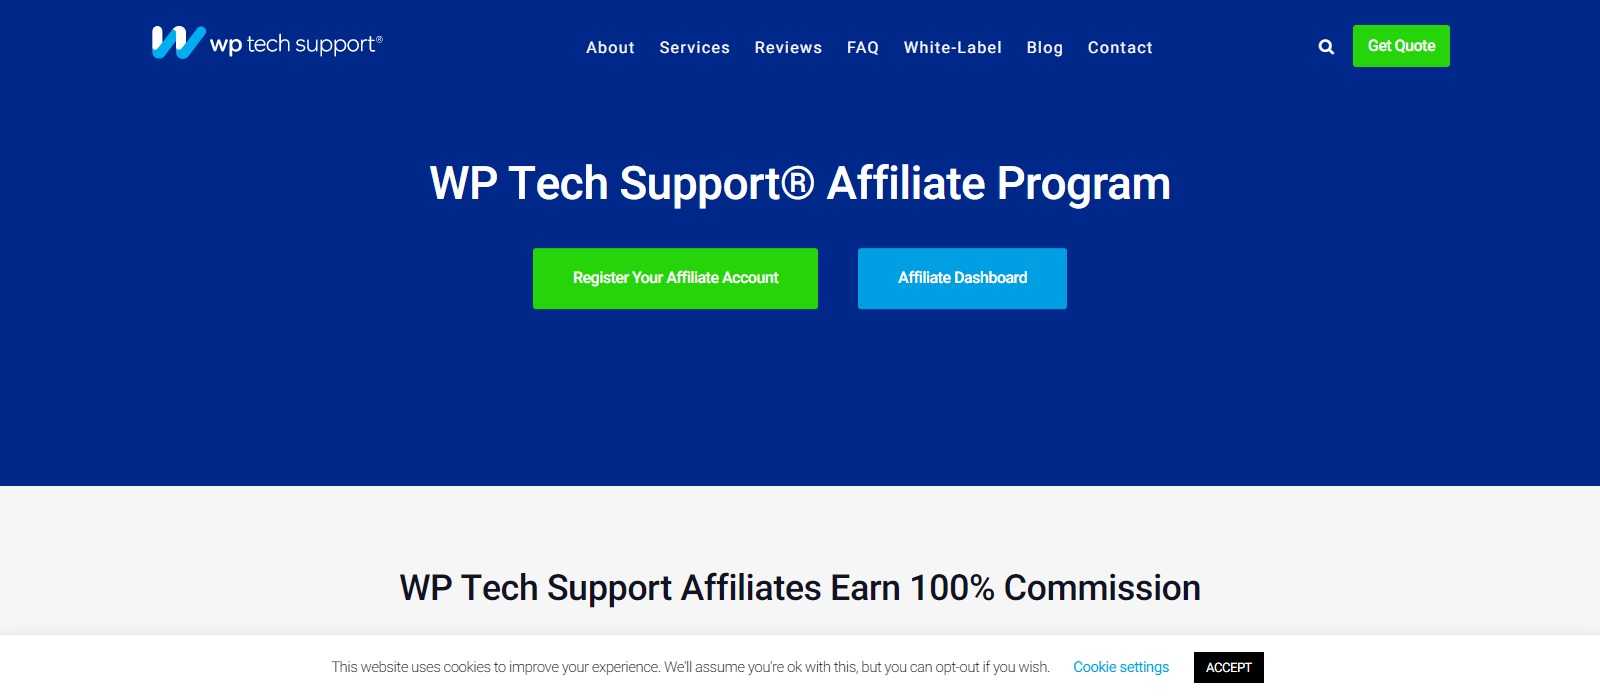 WP Tech Support Affiliates Program Review: Earn 100% commission, up to $68 per sale